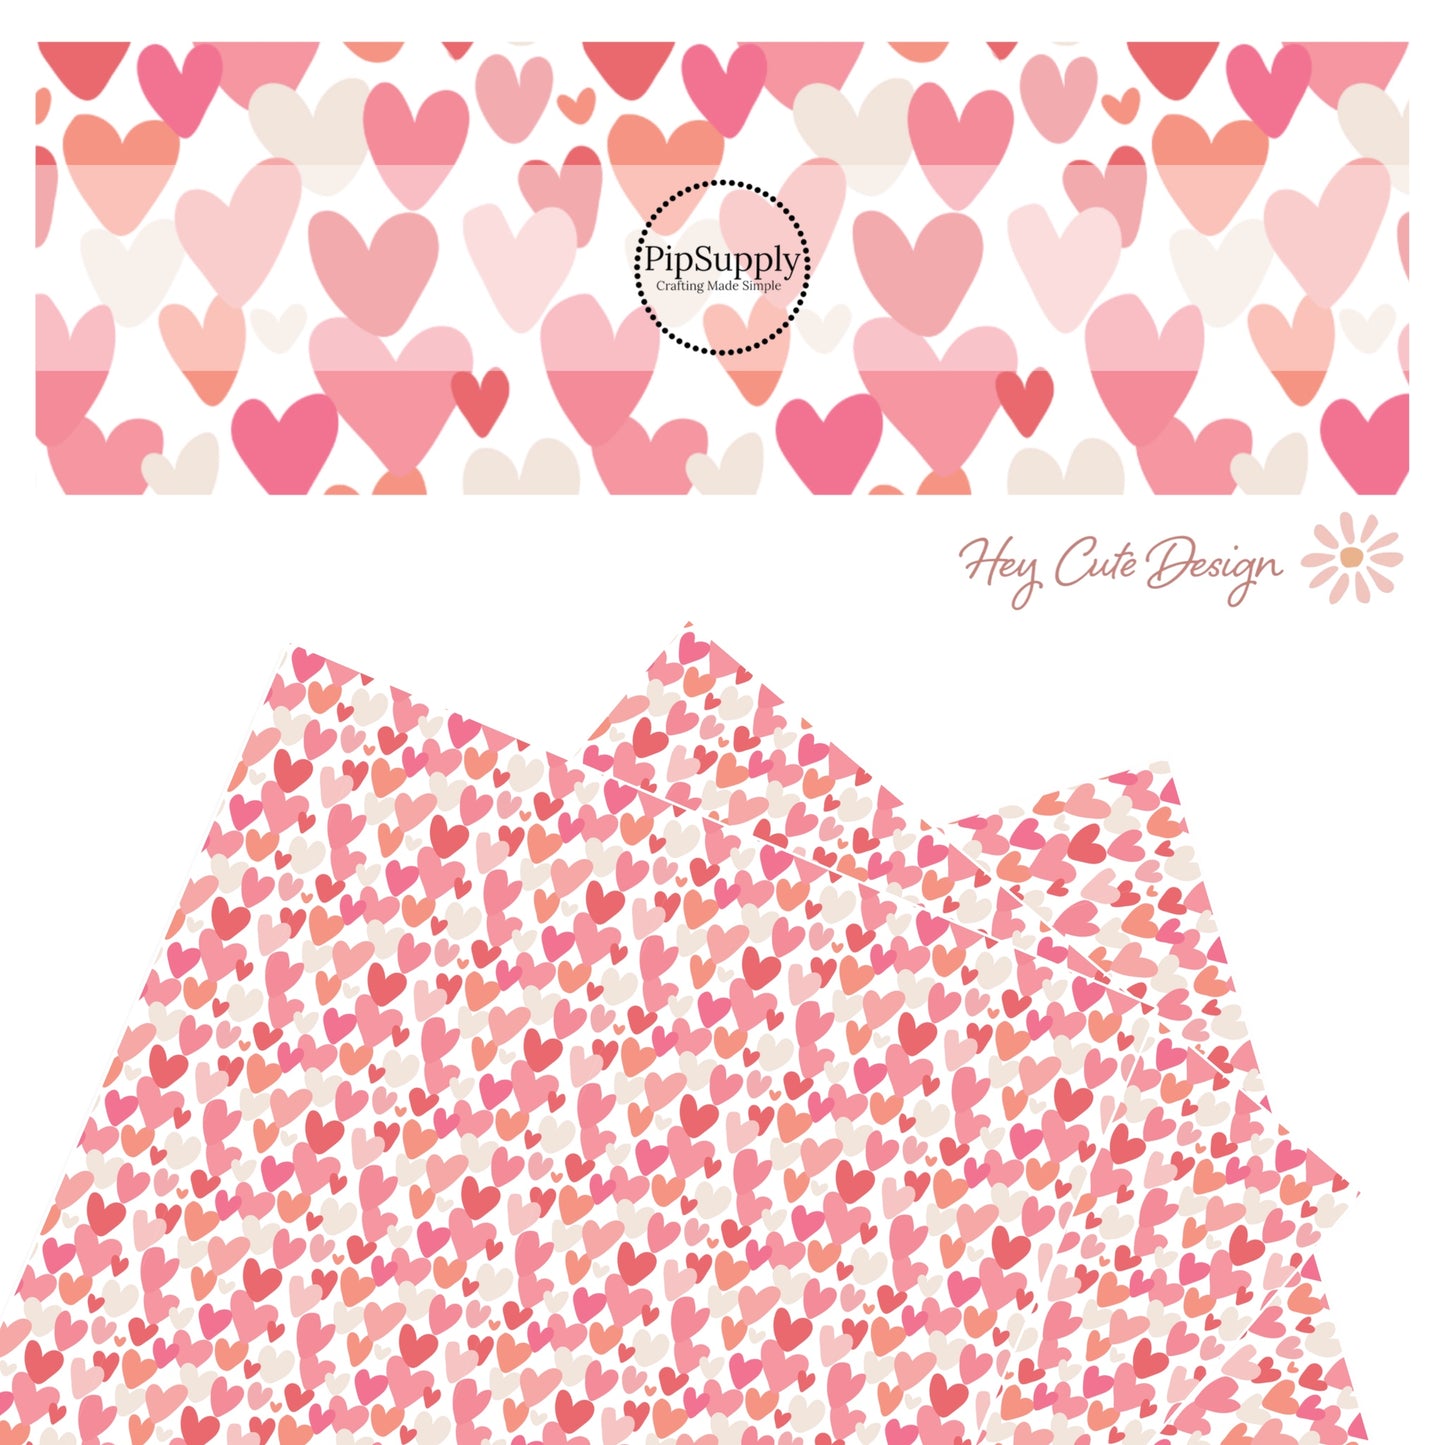 Hot pink, cream, light pink, coral hearts on white faux leather sheets